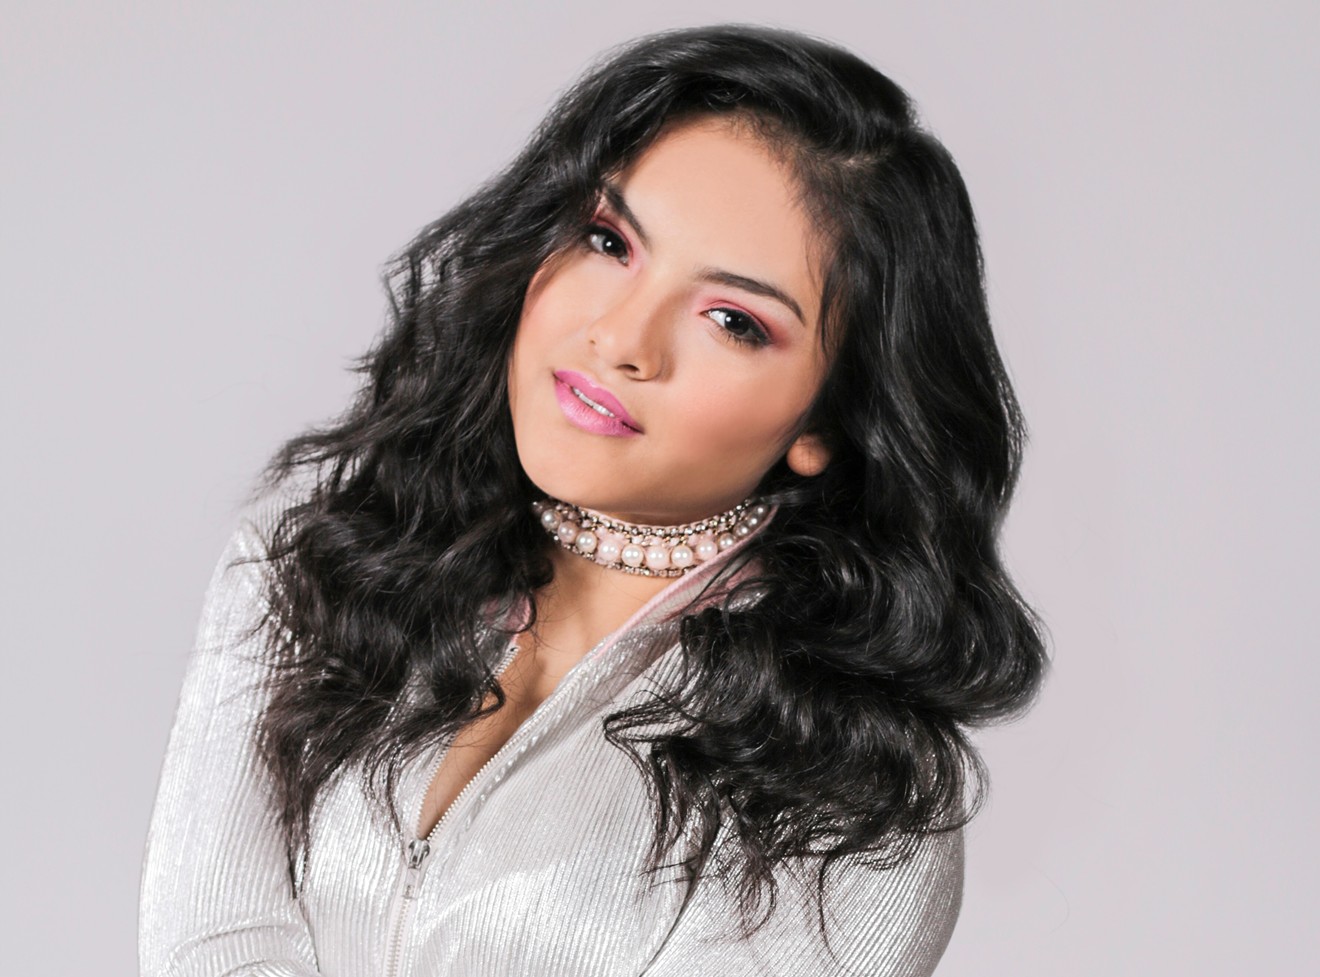 Isabel Marie Sánchez will sing the music of Selena with the Colorado Symphony.